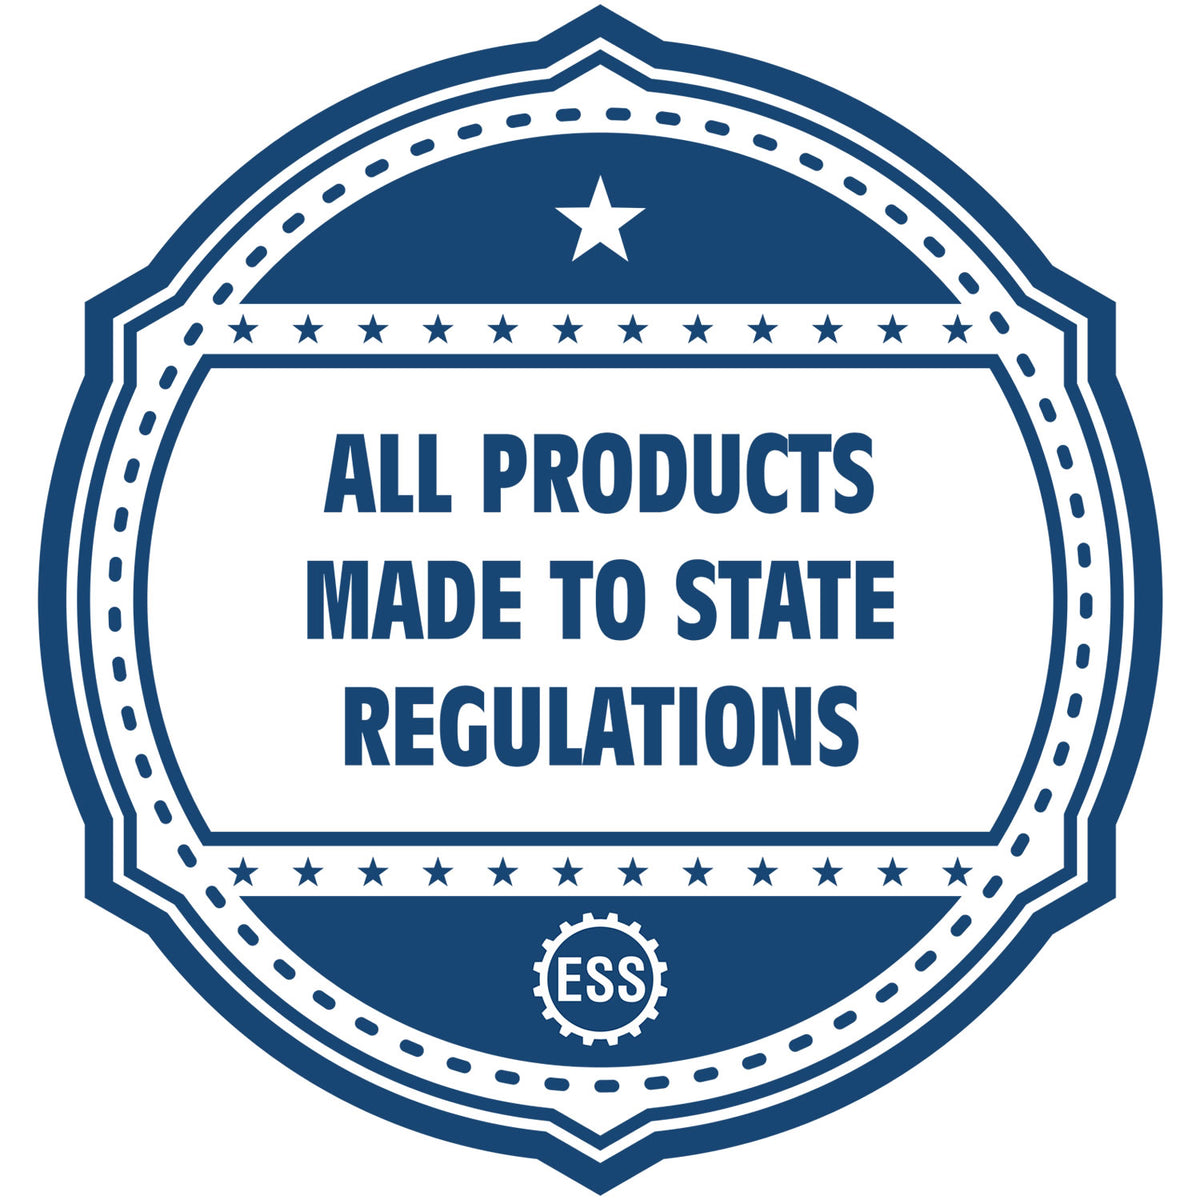 An icon or badge element for the Self-Inking South Carolina PE Stamp showing that this product is made in compliance with state regulations.